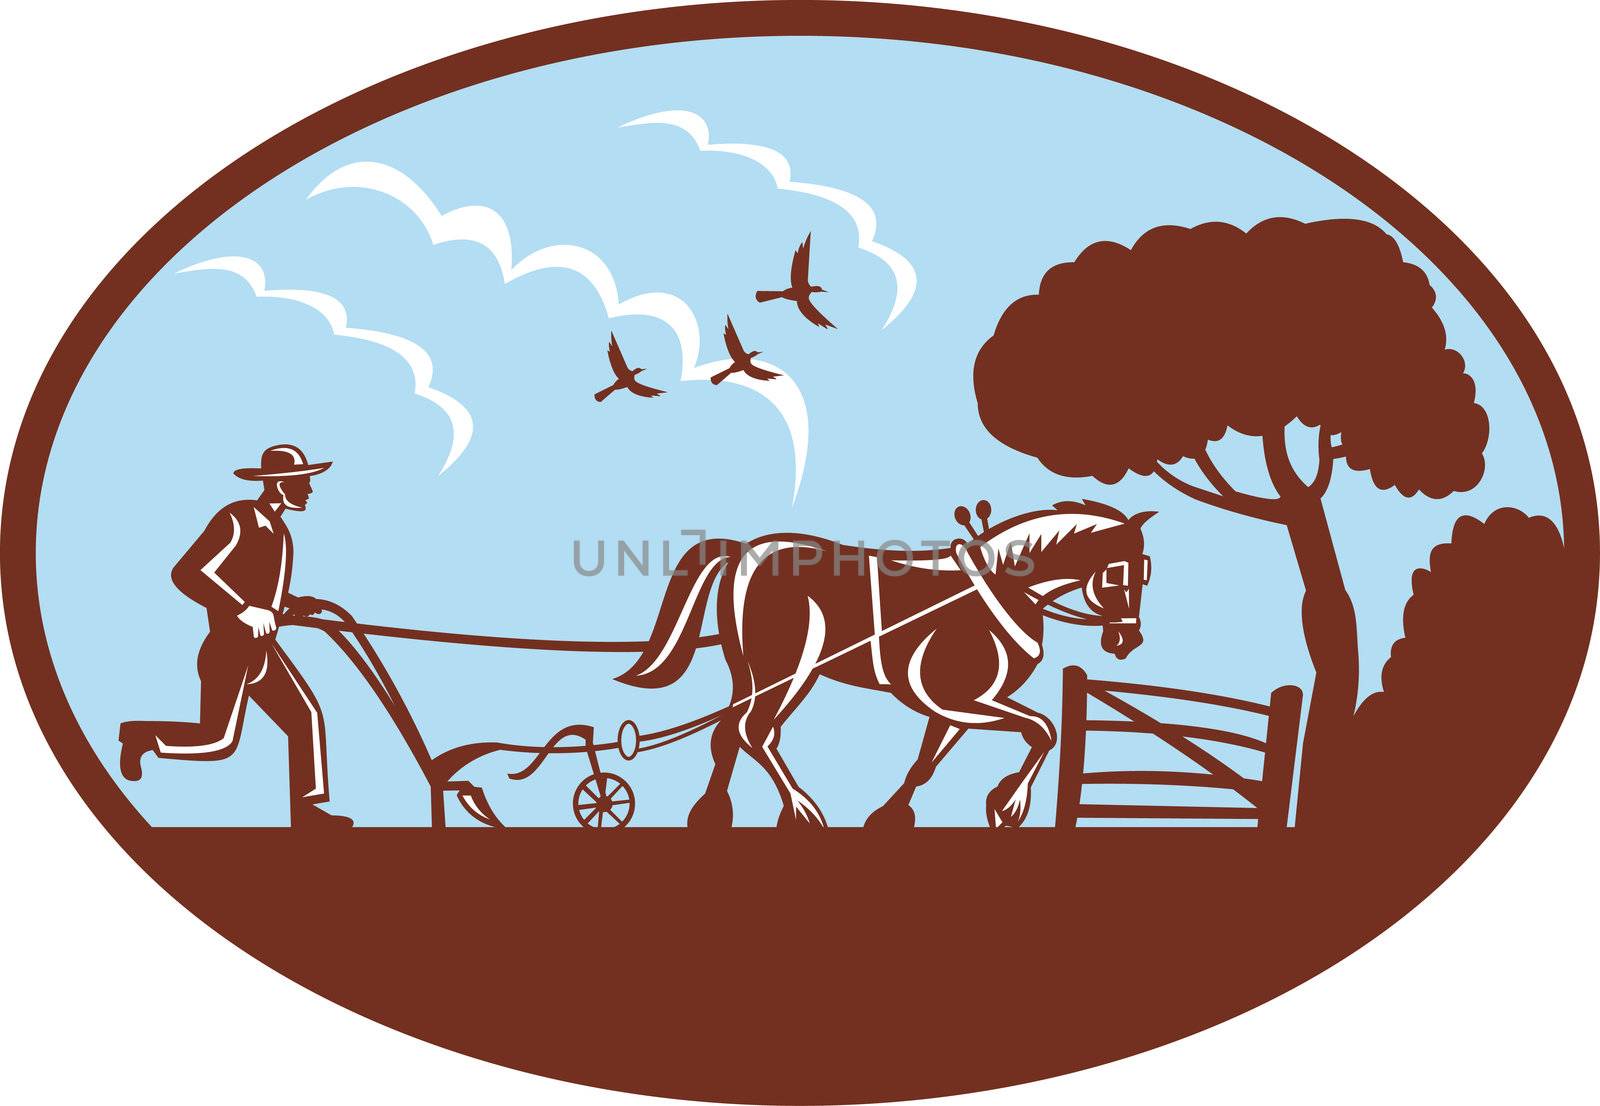 retro style illustration of a farmer and horse plowing